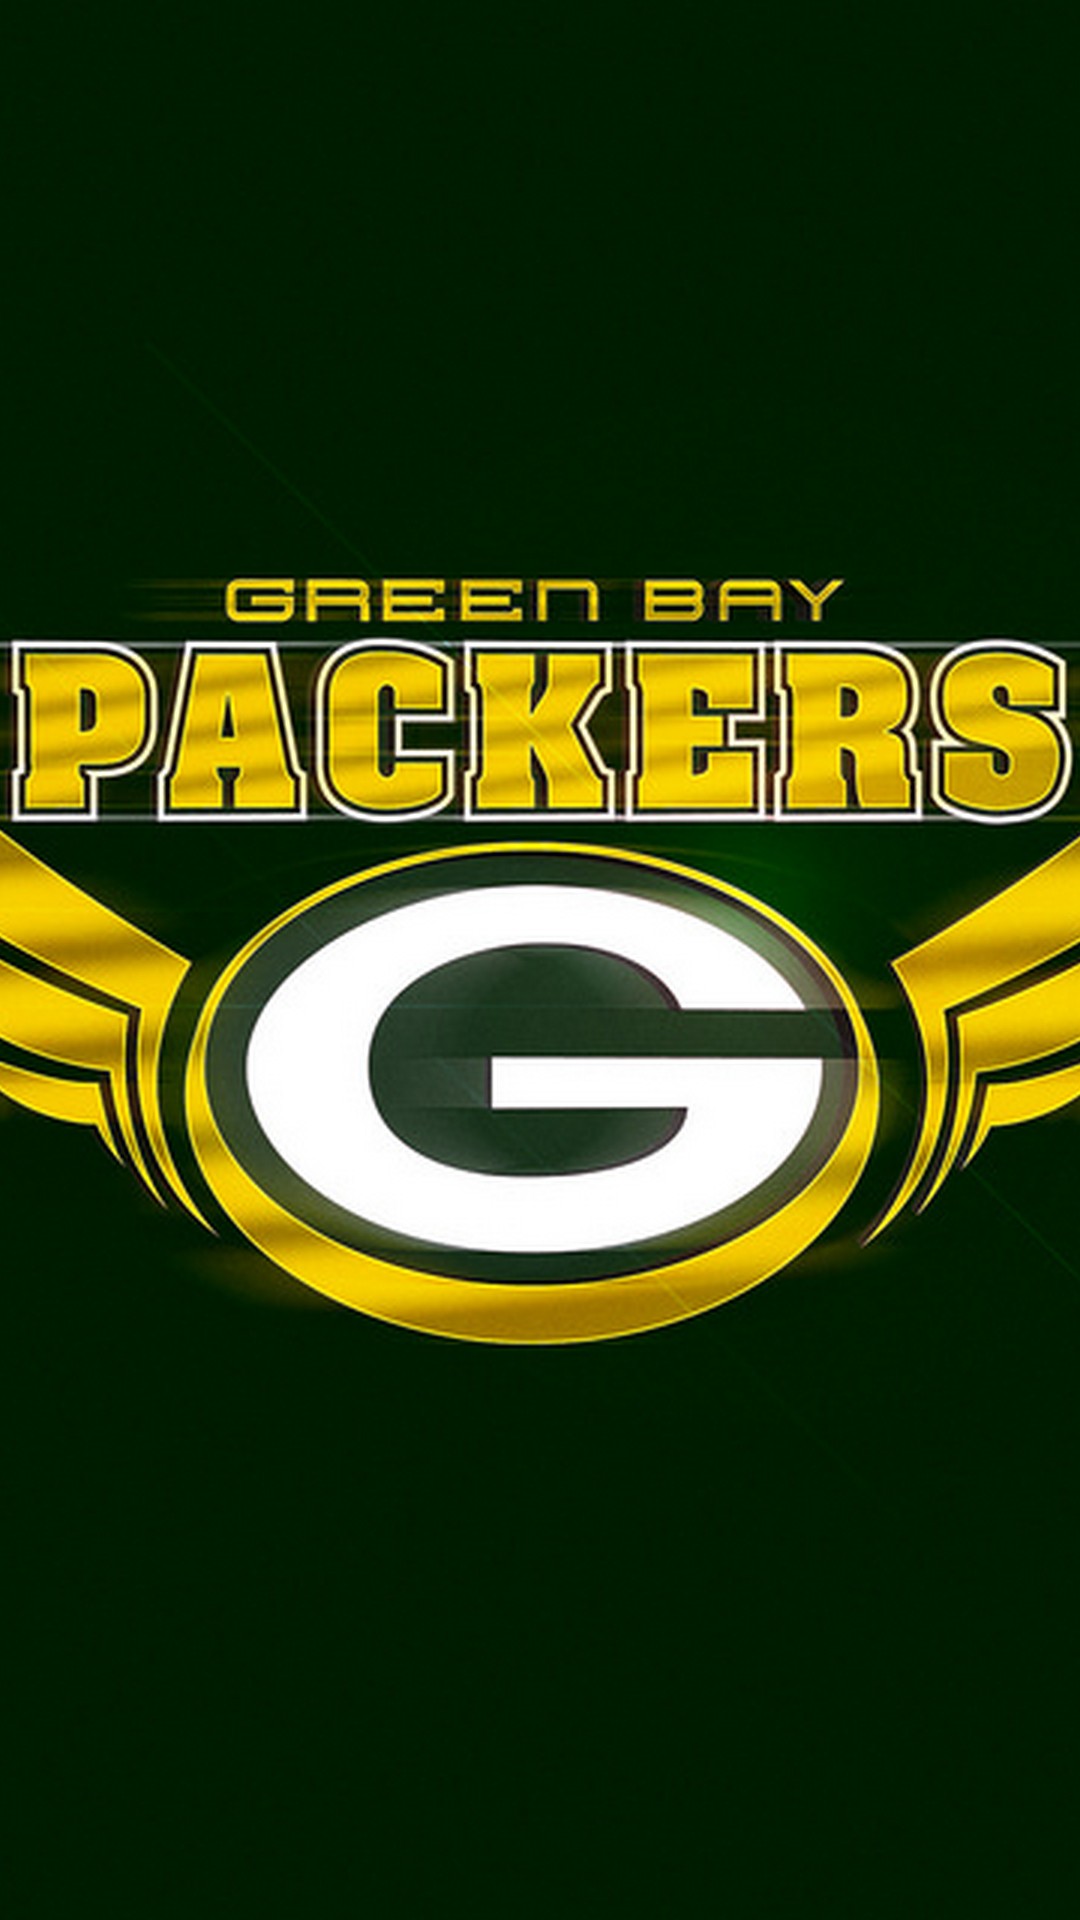 Green Bay Packers iPhone Wallpaper Design with high-resolution 1080x1920 pixel. Download and set as wallpaper for Apple iPhone X, XS Max, XR, 8, 7, 6, SE, iPad, Android